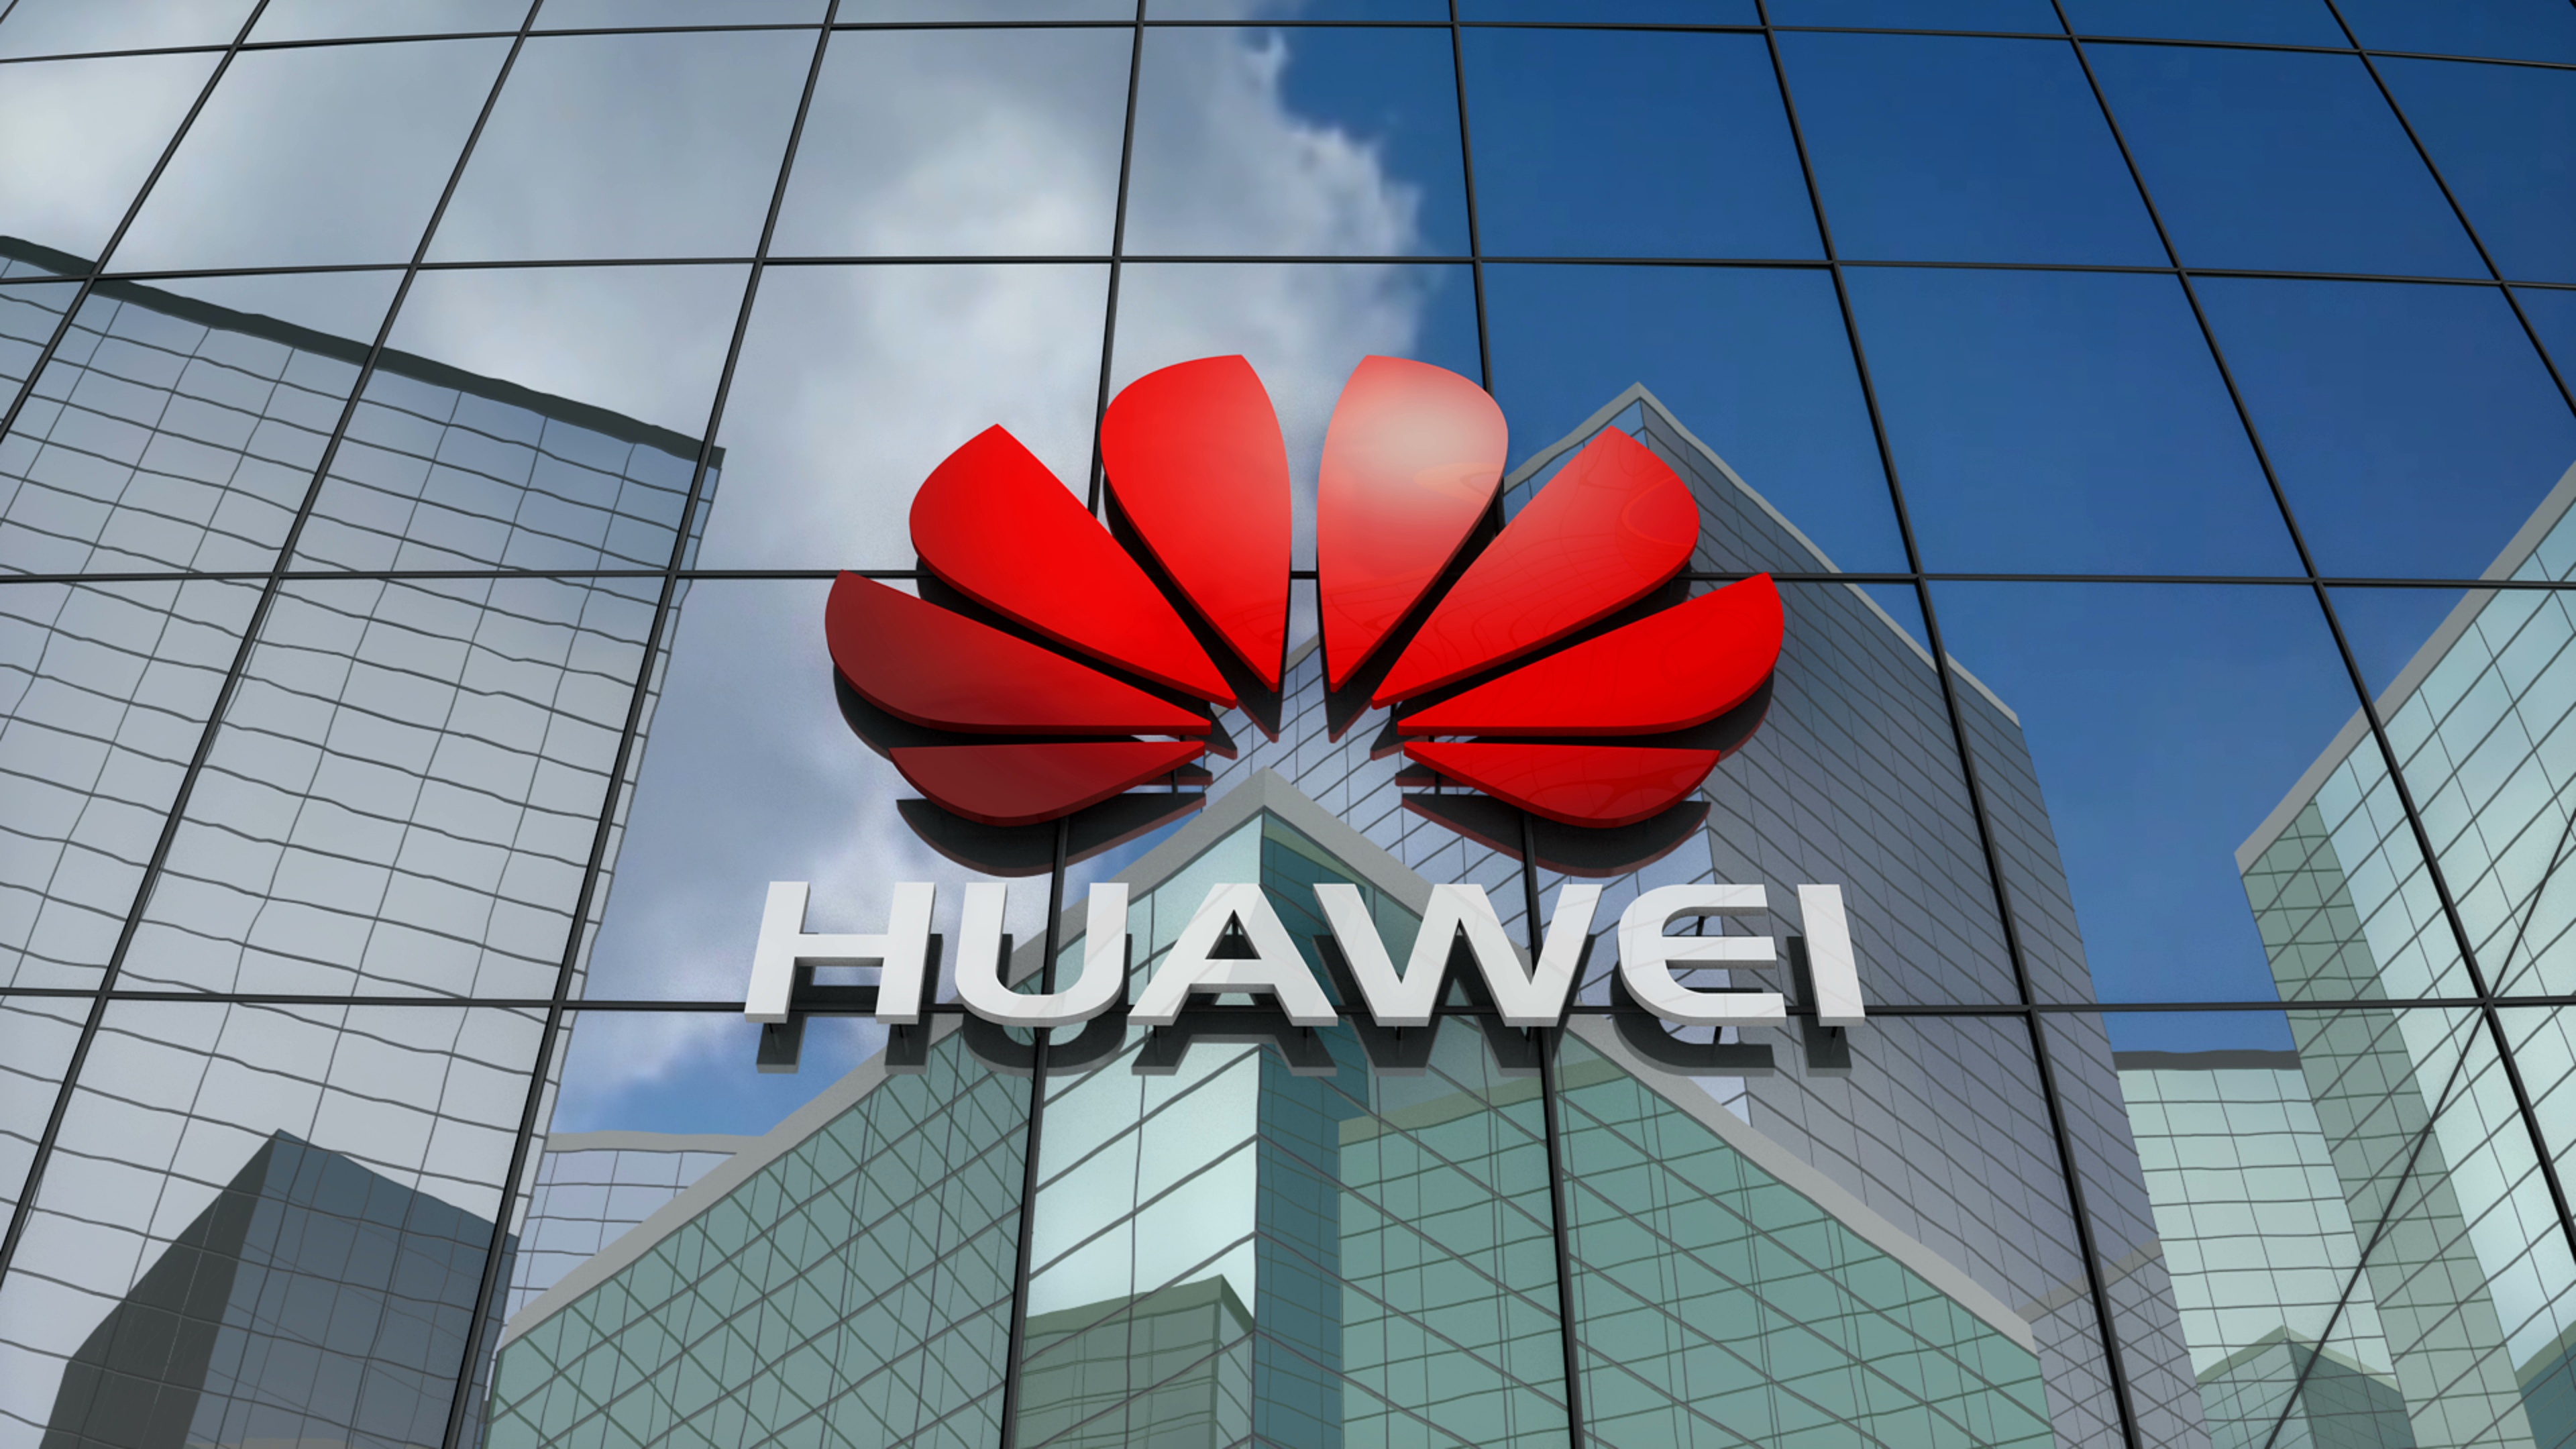 China's Huawei is now the largest smartphone maker in the world